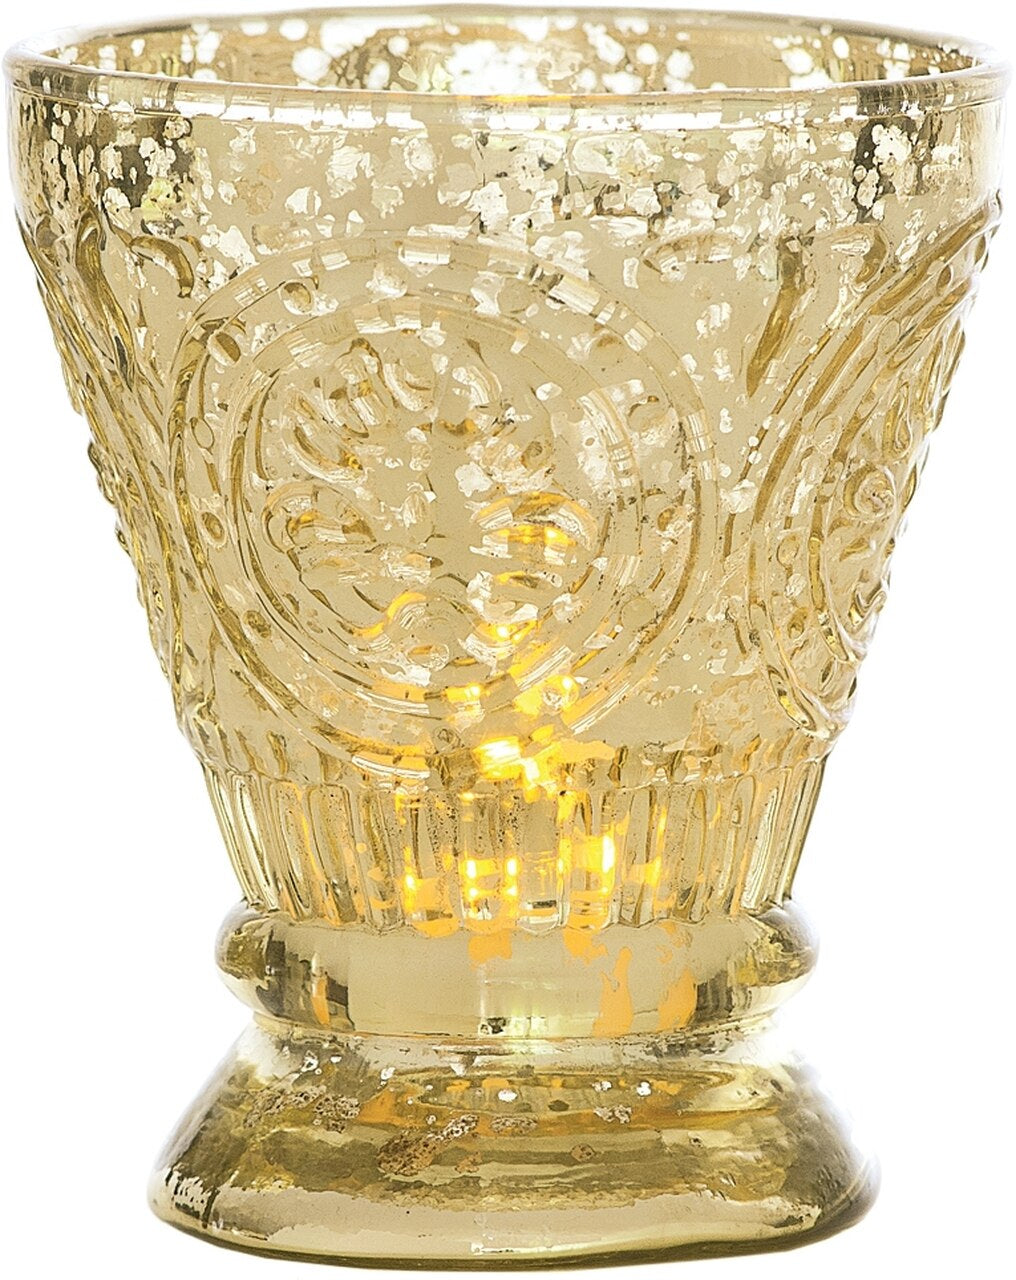 Vintage Mercury Glass Candle Holder (4-Inch, Rosemary Design, Gold) - For Use with Tea Lights - For Home Decor, Parties, and Wedding Decorations - PaperLanternStore.com - Paper Lanterns, Decor, Party Lights & More